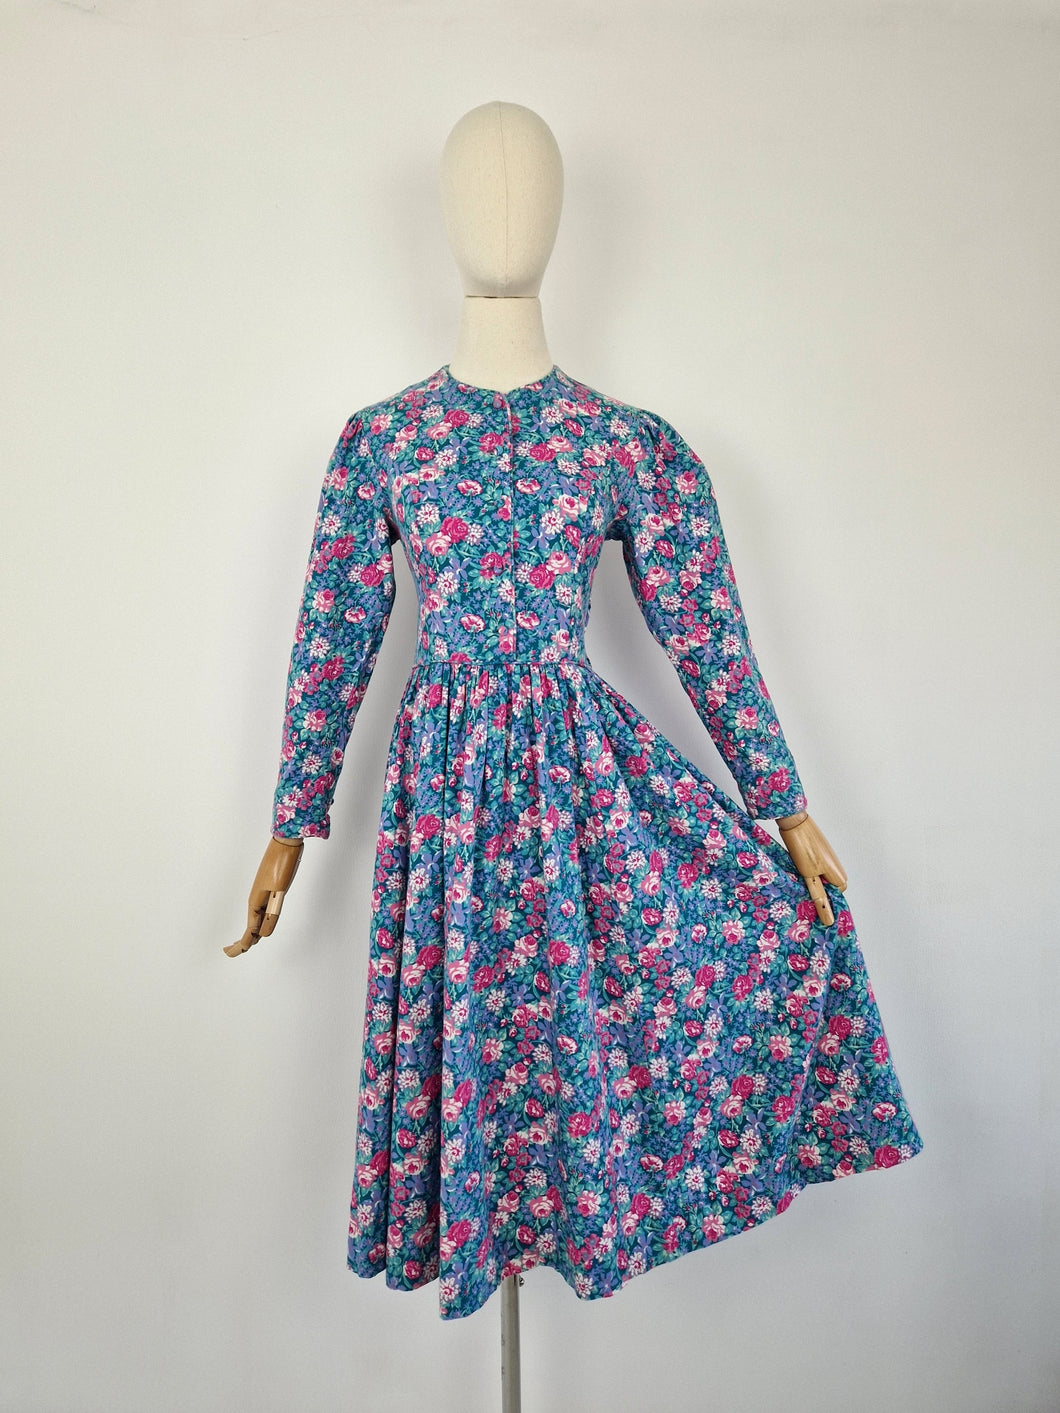 Vintage 90s Laura Ashley green and pink dress